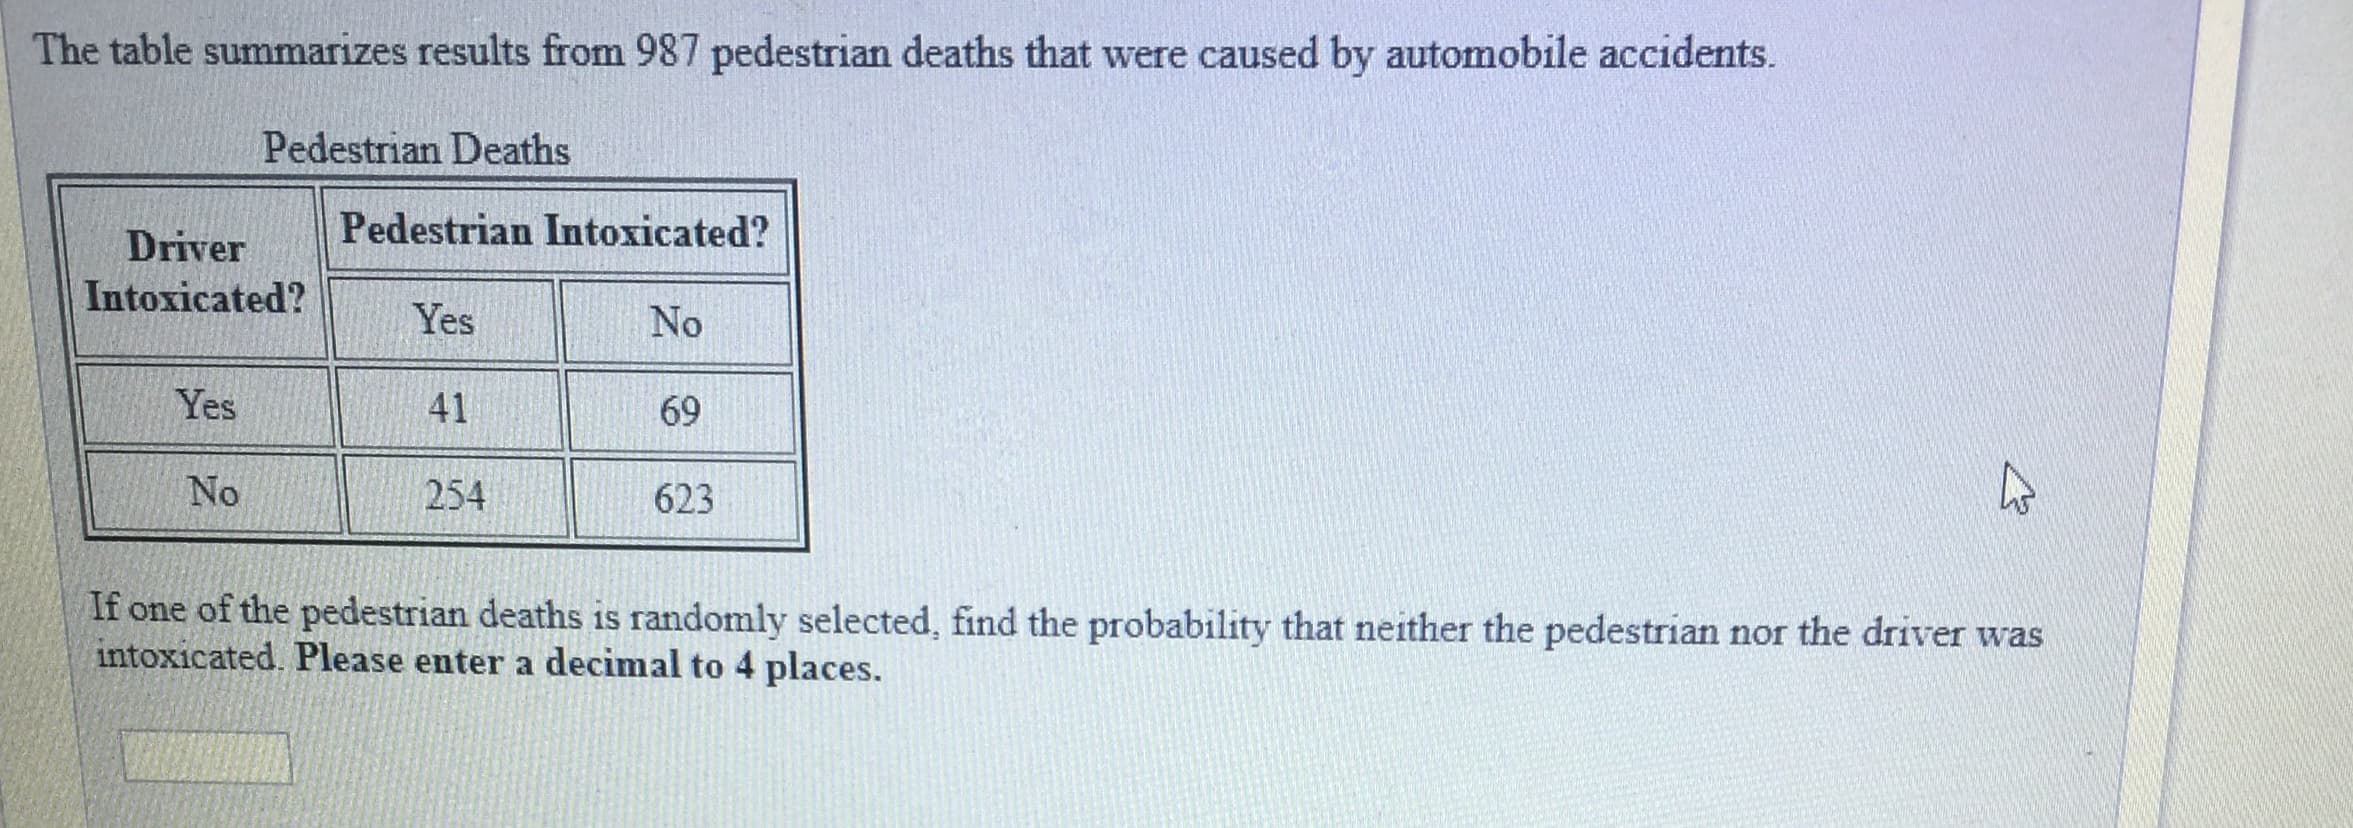 The table summarizes results from 987 pedestrian deaths that were caused by automobile accidents.
Pedestrian Deaths
Pedestrian Intoxicated?
Driver
Intoxicated?YesNo
Yes
41
69
No
254
623
If one of the pedestrian deaths is randomly selected, find the probability that neither the pedestrian nor the driver was
intoxicated. Please enter a decimal to 4 places
